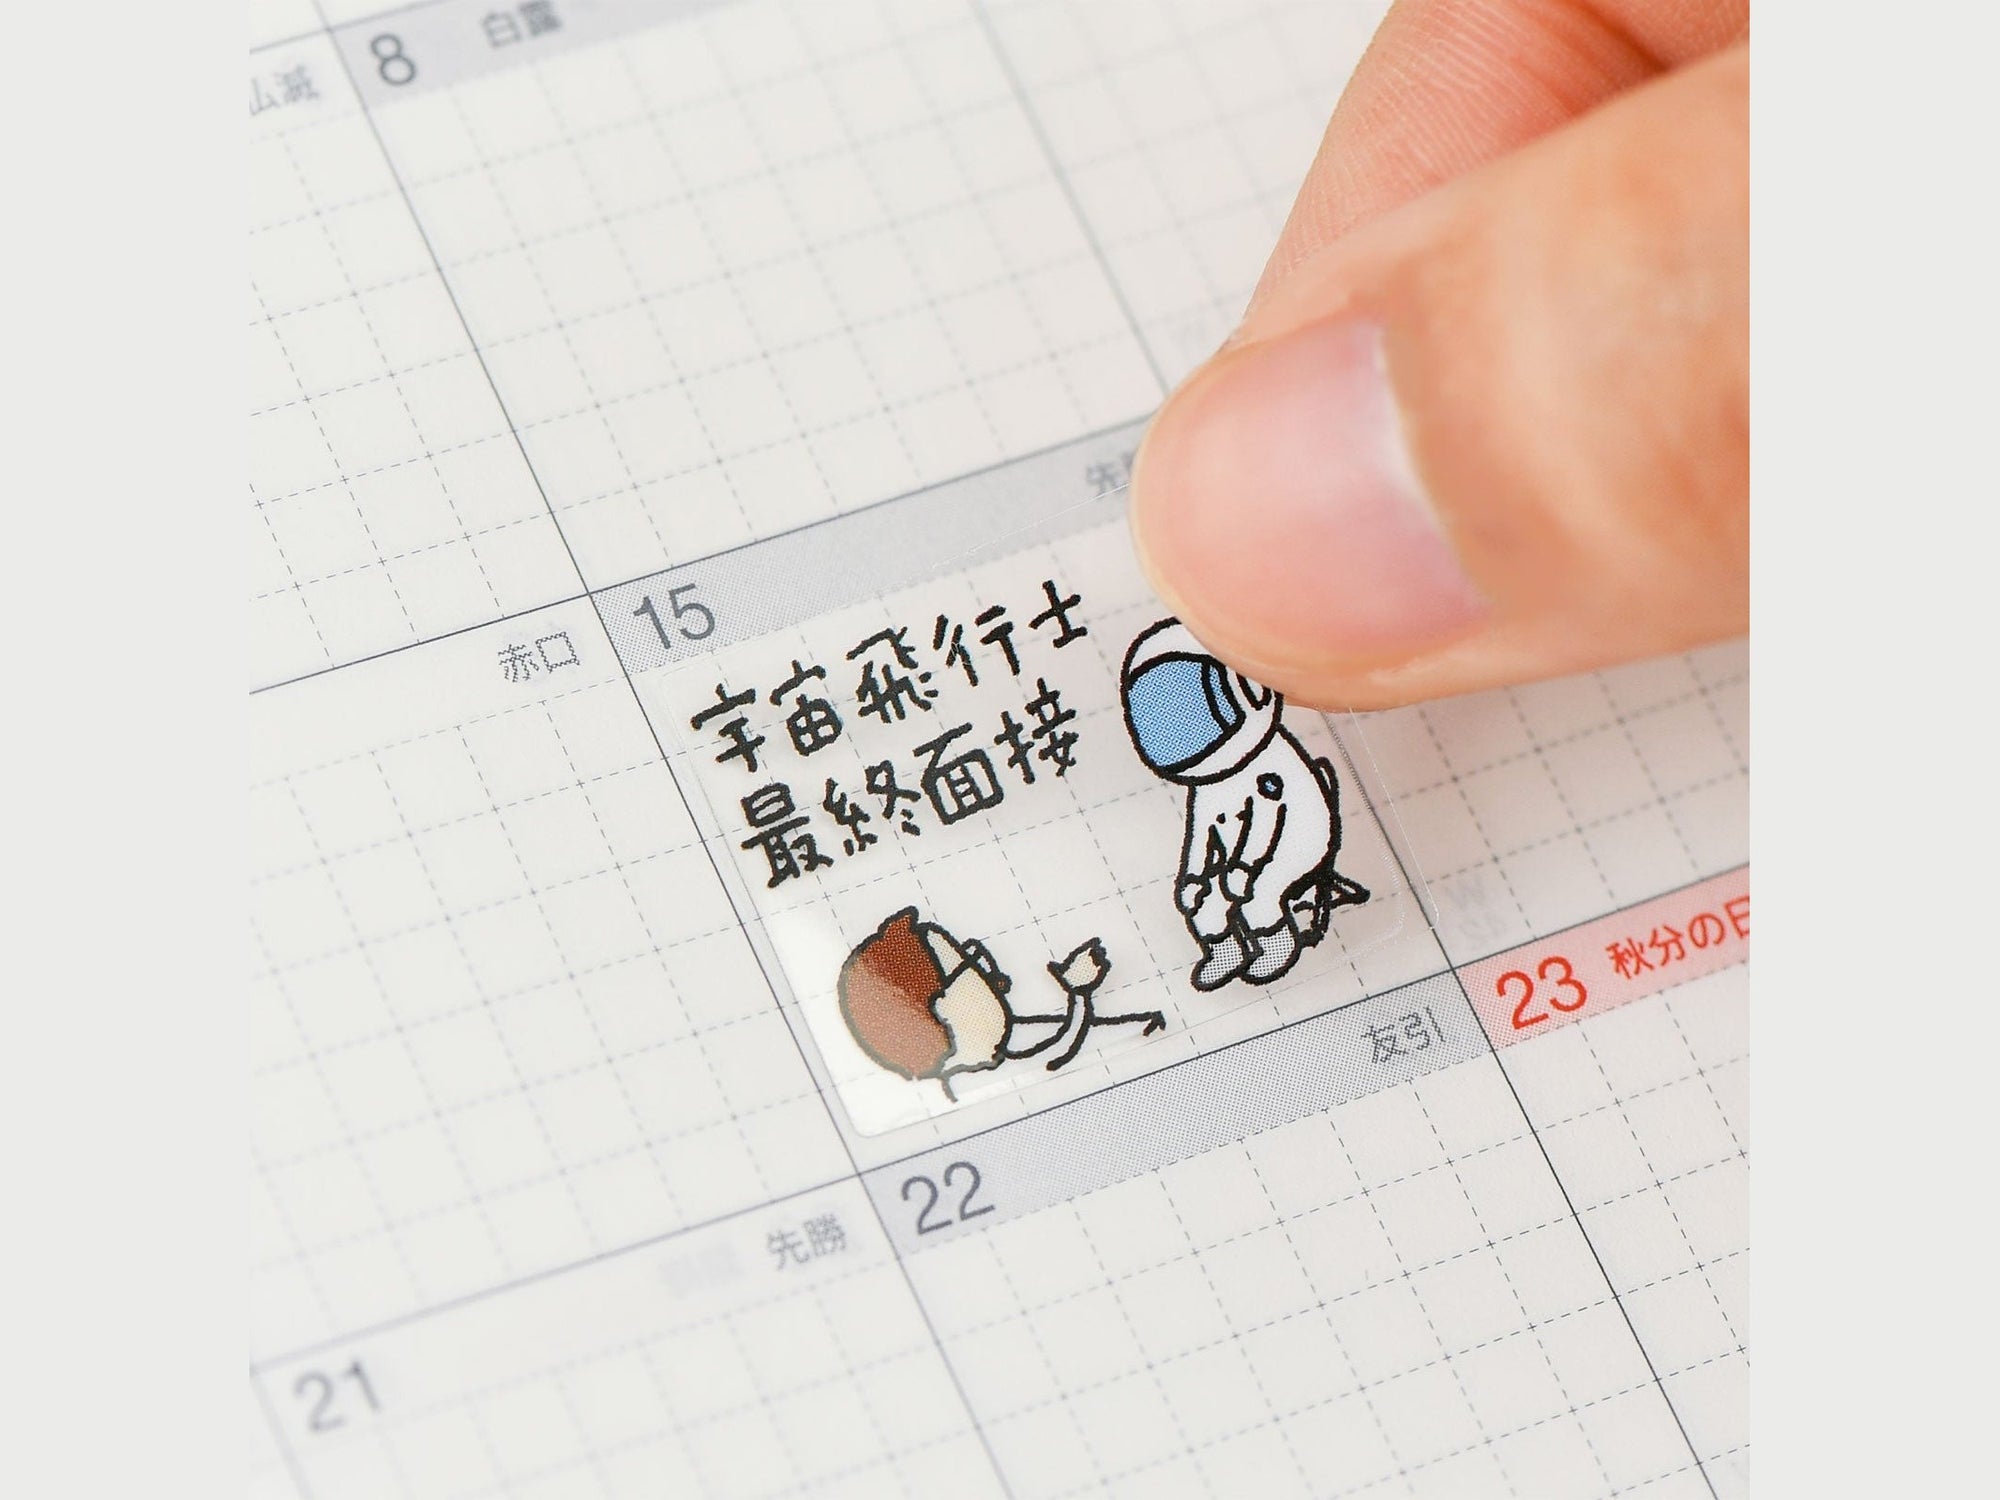 Hobonichi Plans More Important Than Work Stickers